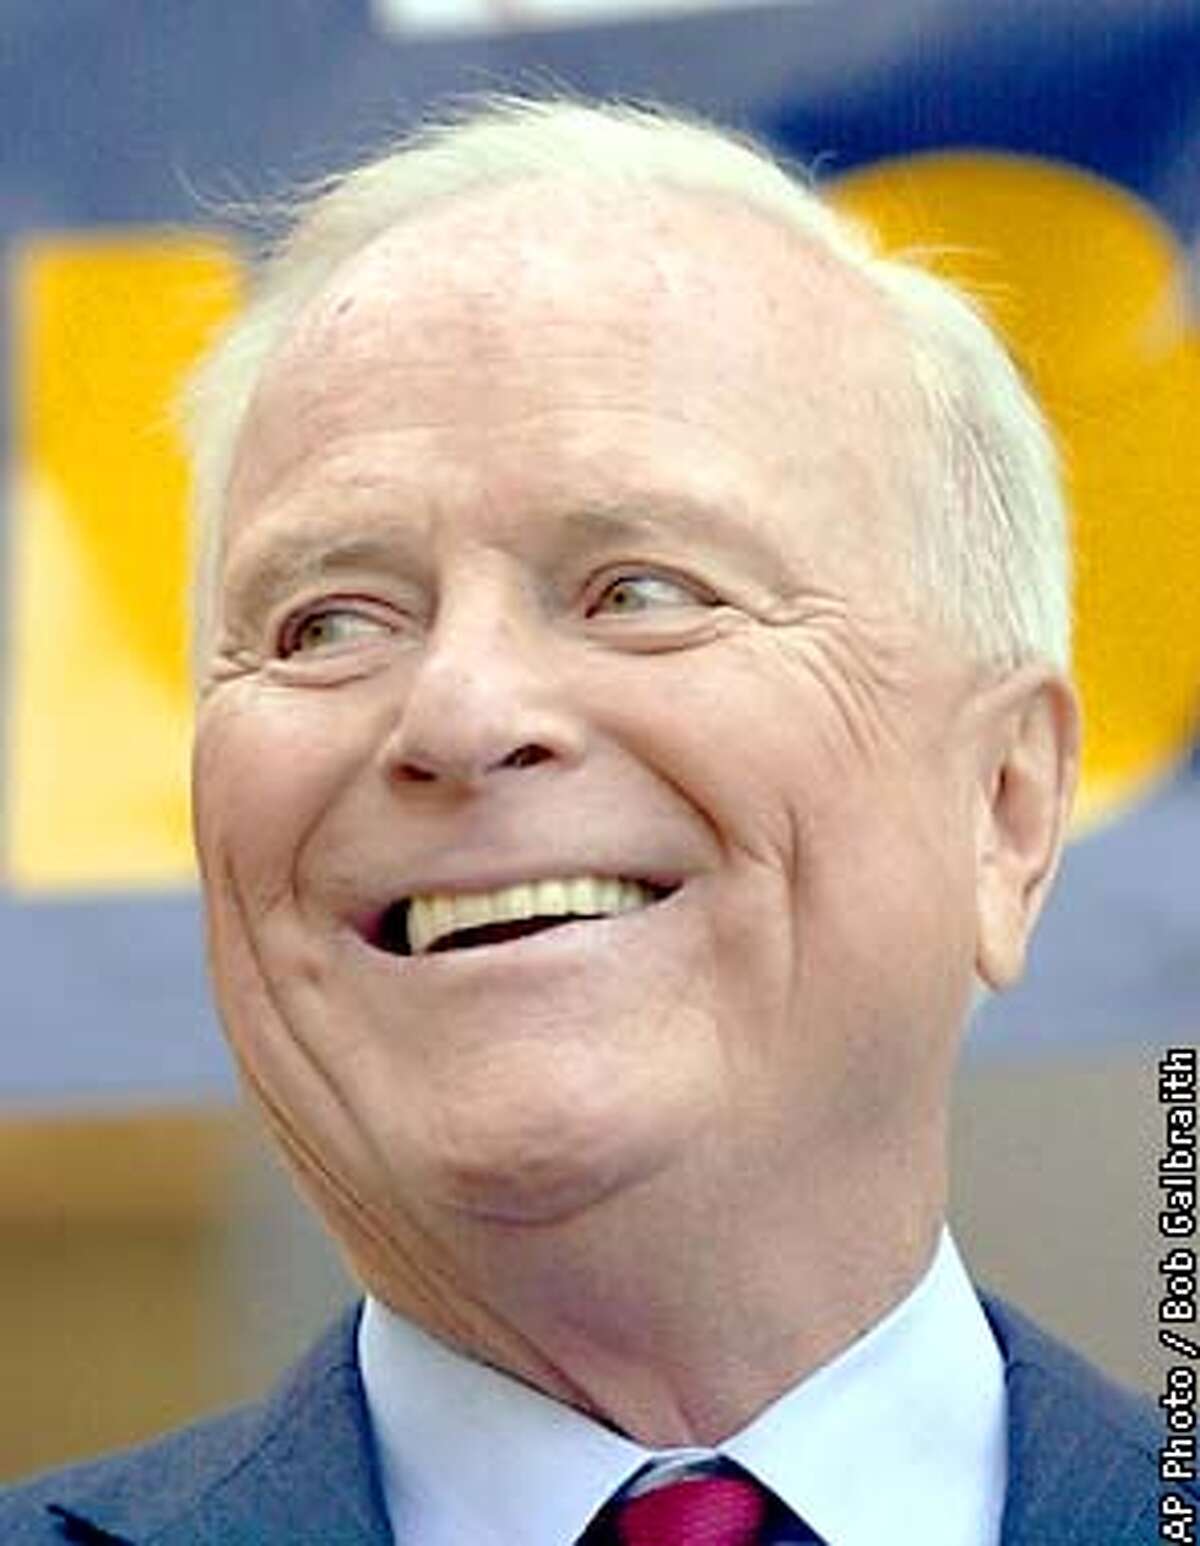 Former Los Angeles Mayor Richard Riordan smiles during a news conference Wednesday, Nov. 7, 2001, in Sacramento, Calif. Riordan, on the second day of a statewide tour announcing his candidacy for the Republican nomination for governor, attacked Gov. Gray Davis' handling of the state's power crisis. (AP Photo/Bob Galbraith) ALSO RAN 11/12/2001